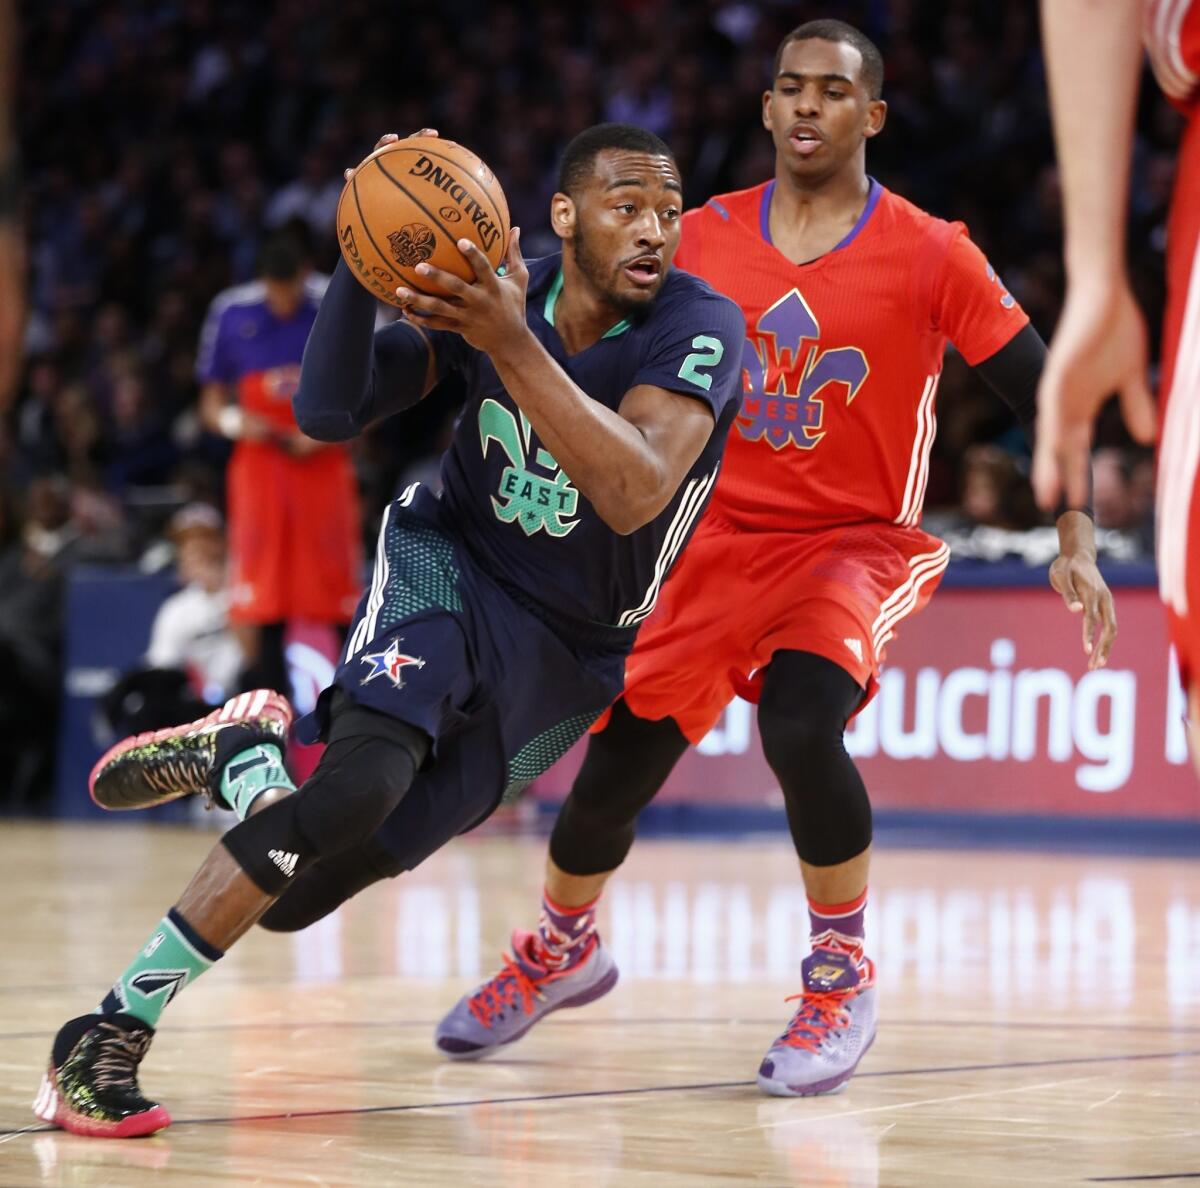 John Wall, left, driving past Chris Paul in the NBA All-Star game, is averaging 19.8 points and 8.8 assists for the Washington Wizards.